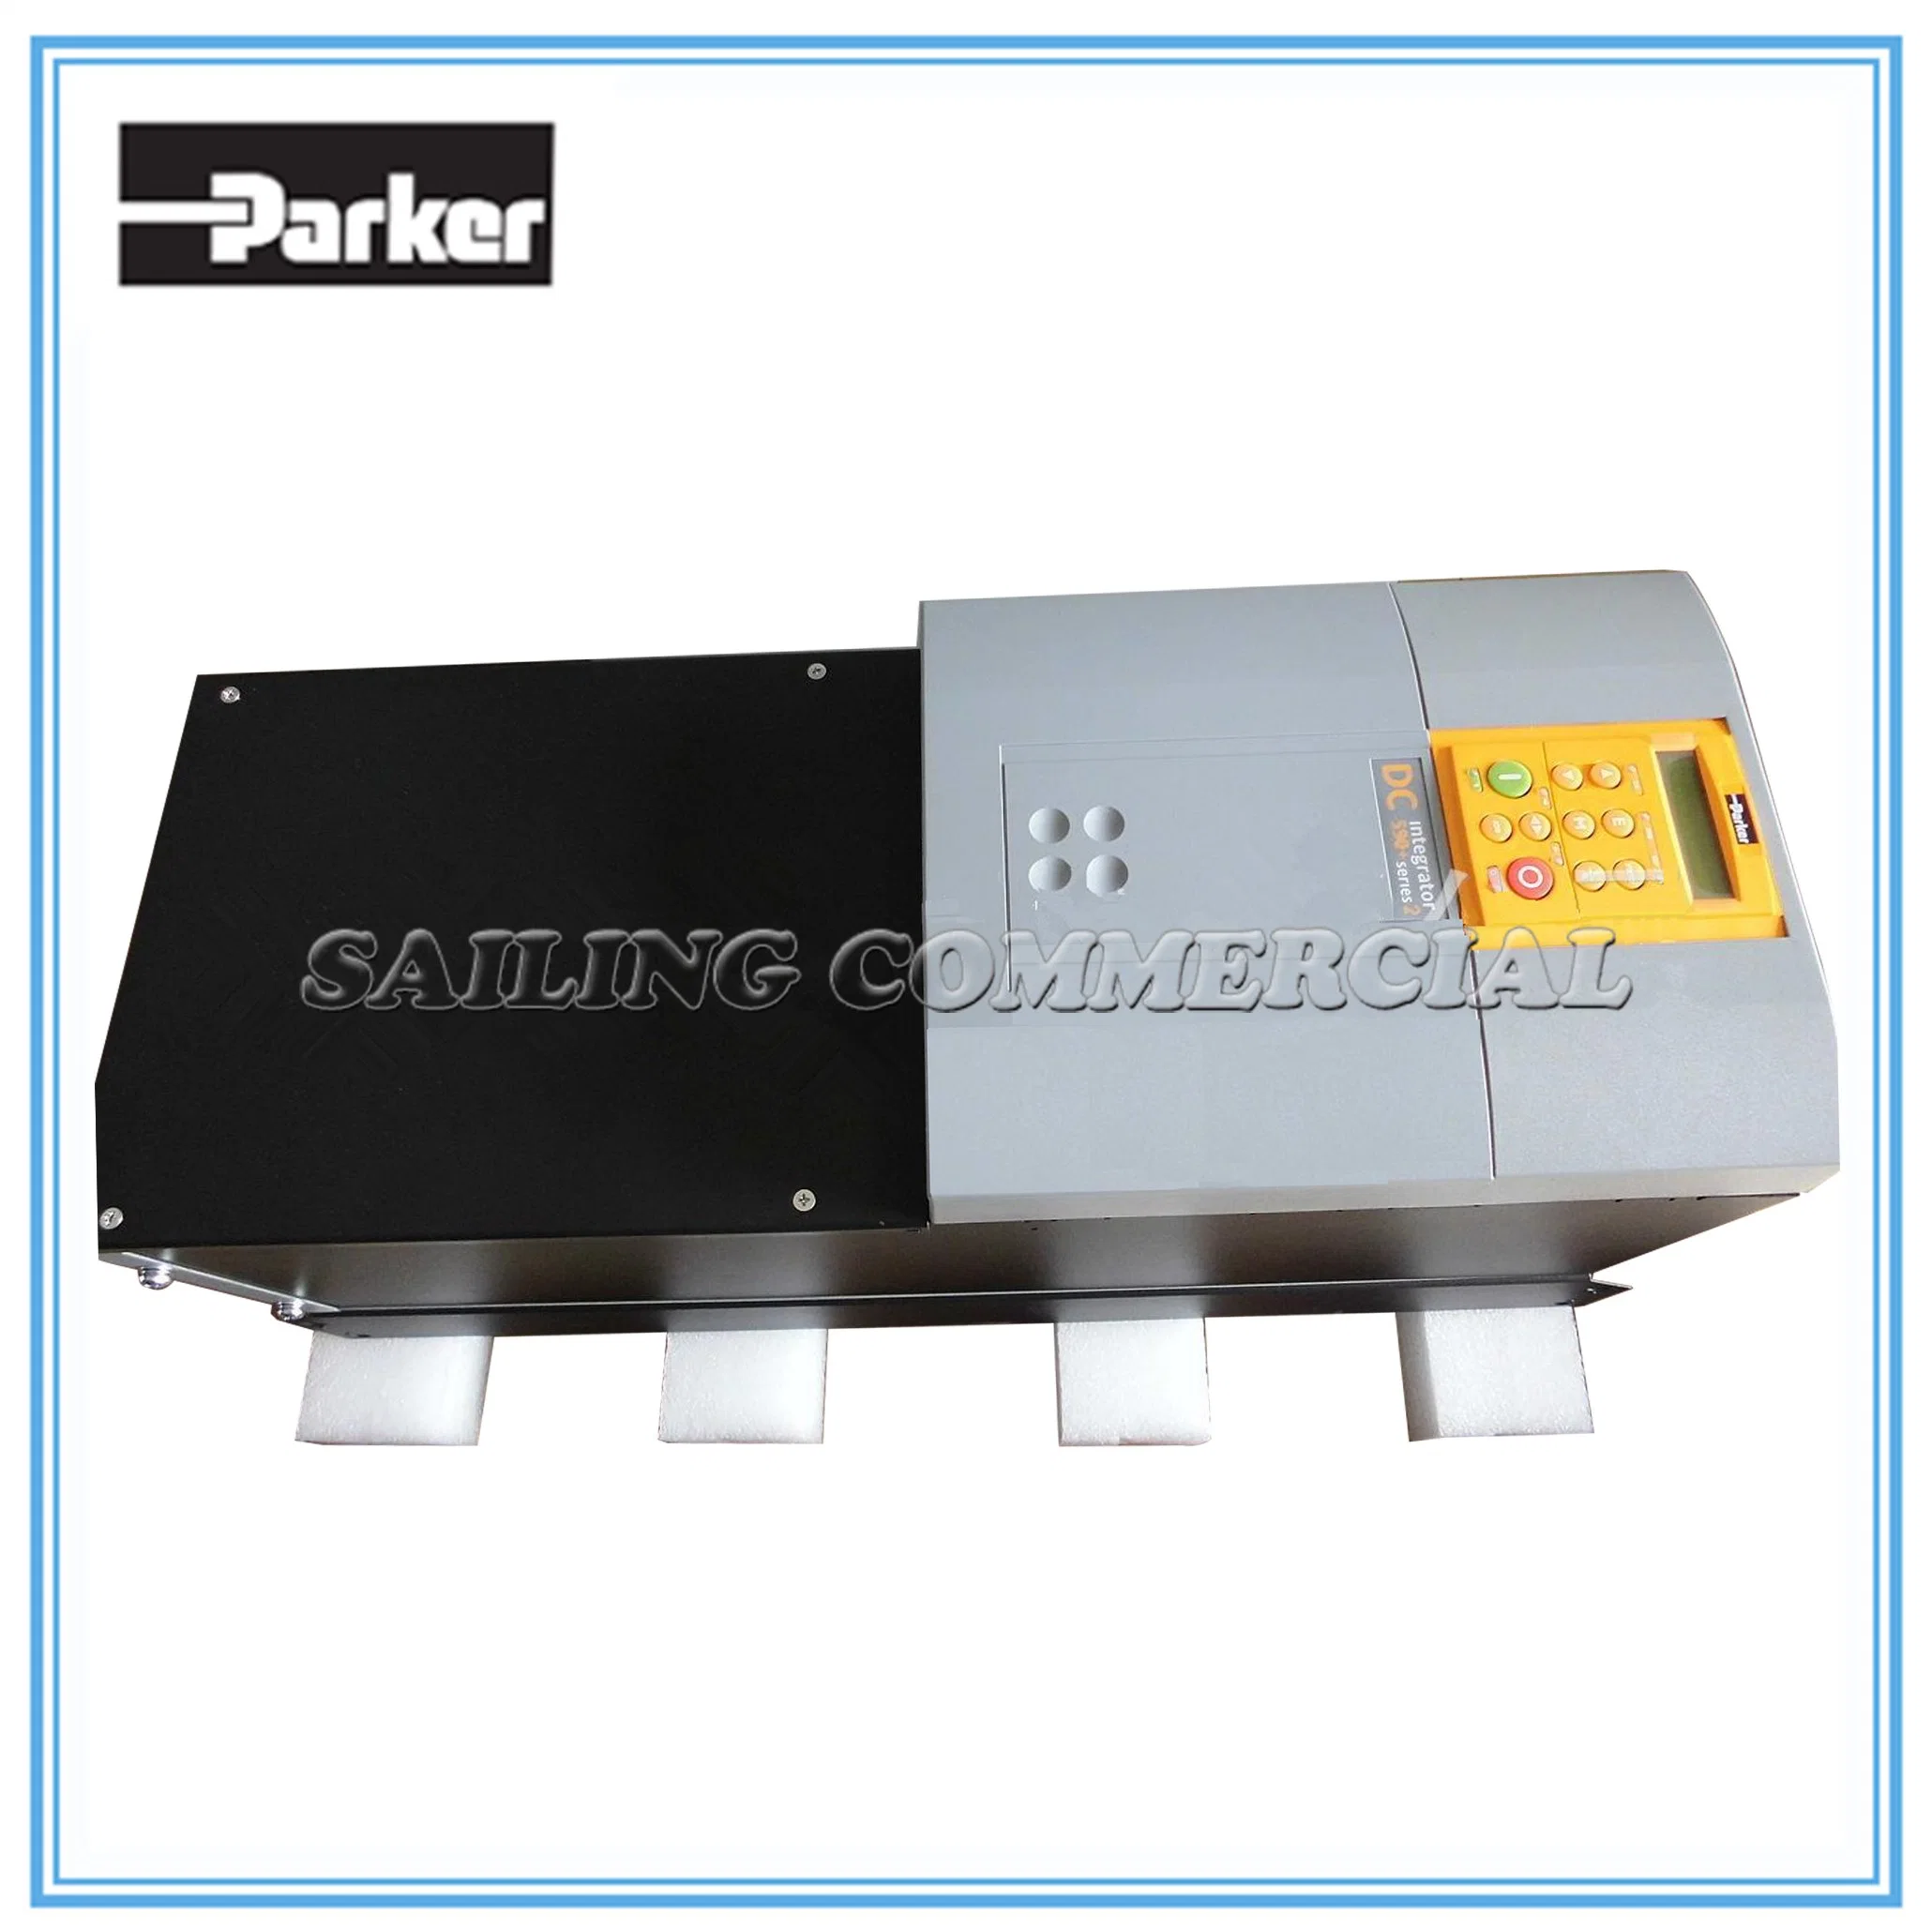 DC Motor Speed Controllers- DC590+ Series Parker 590p-53270020-P00-U4a0